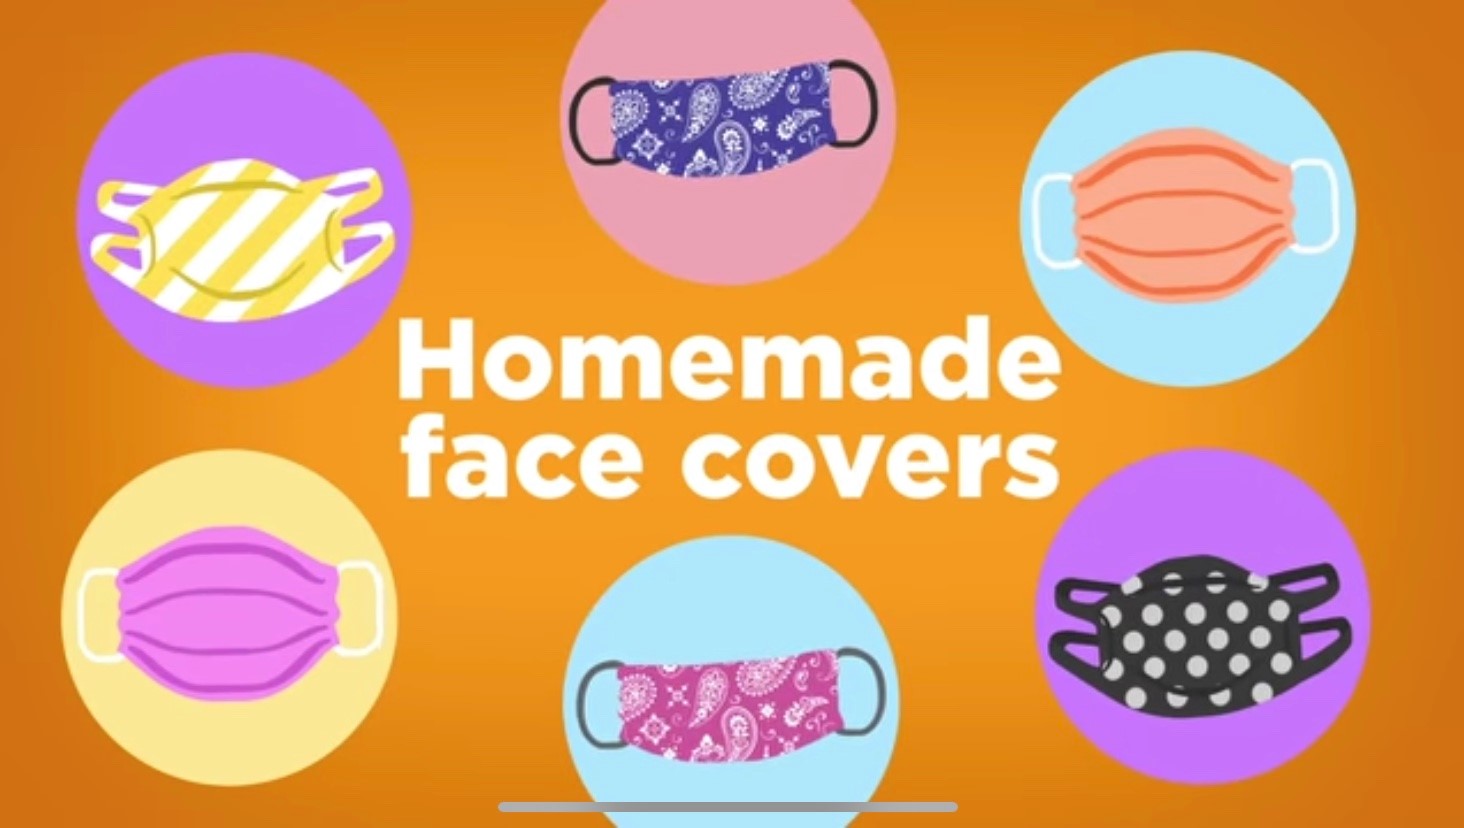 If you are going outside of your home because you're an essential worker or you're performing an essential task, wear a face mask. Homemade face masks can be made out of t-shirt or bandanas.